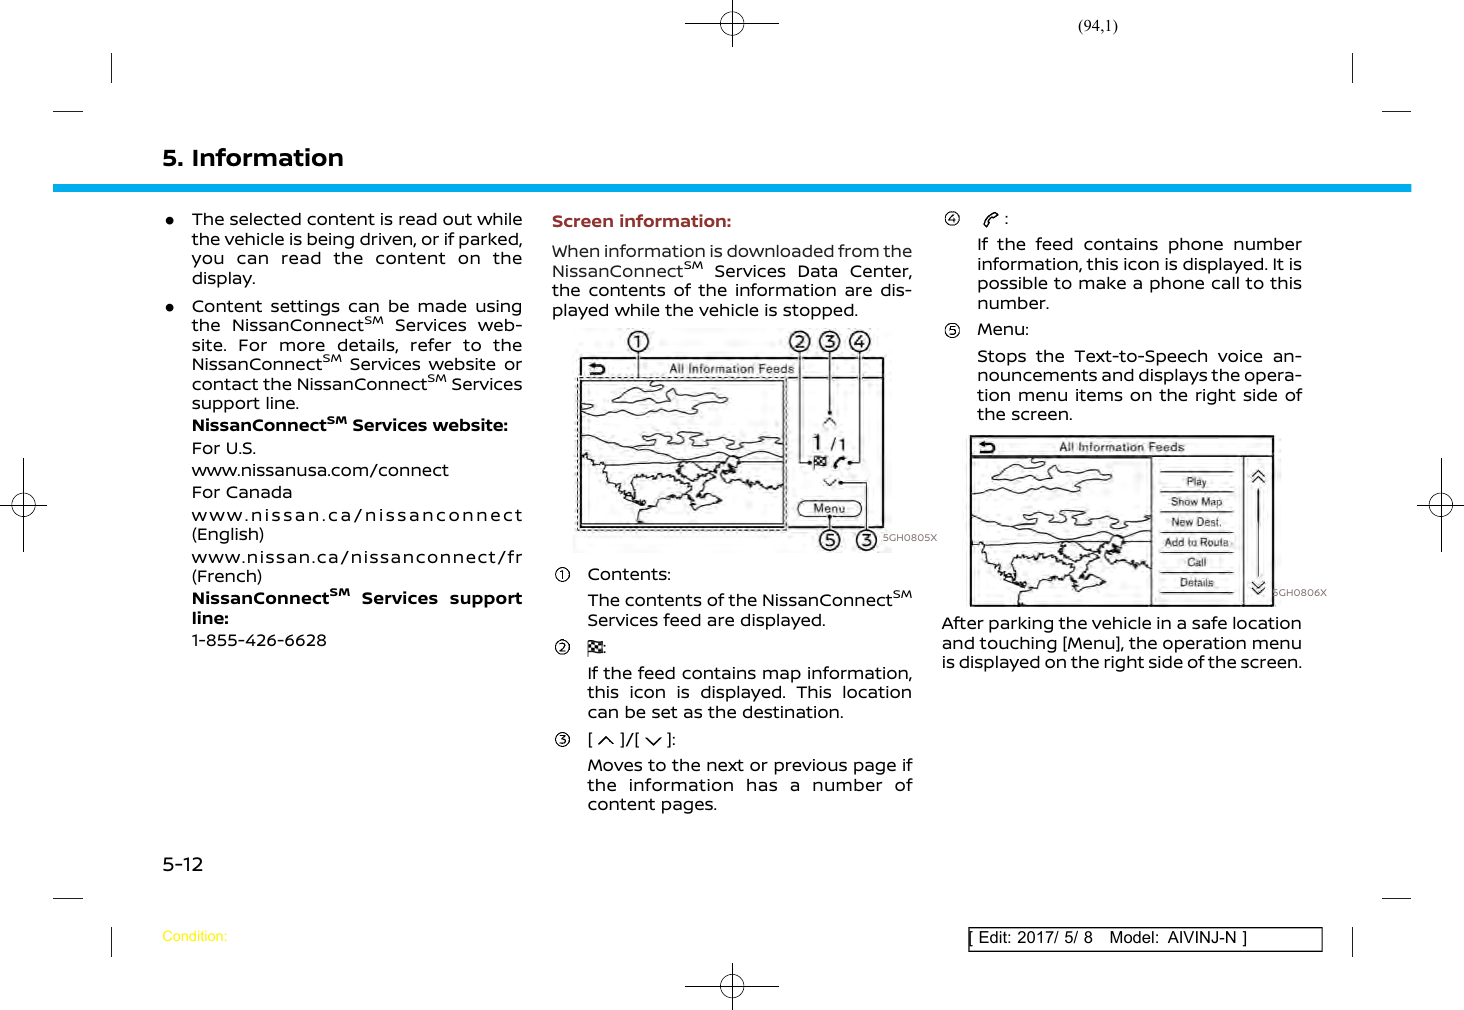 Page 94 of Robert Bosch Car Multimedia AIVICMFB0 Navigation System with Bluetooth and WLAN User Manual